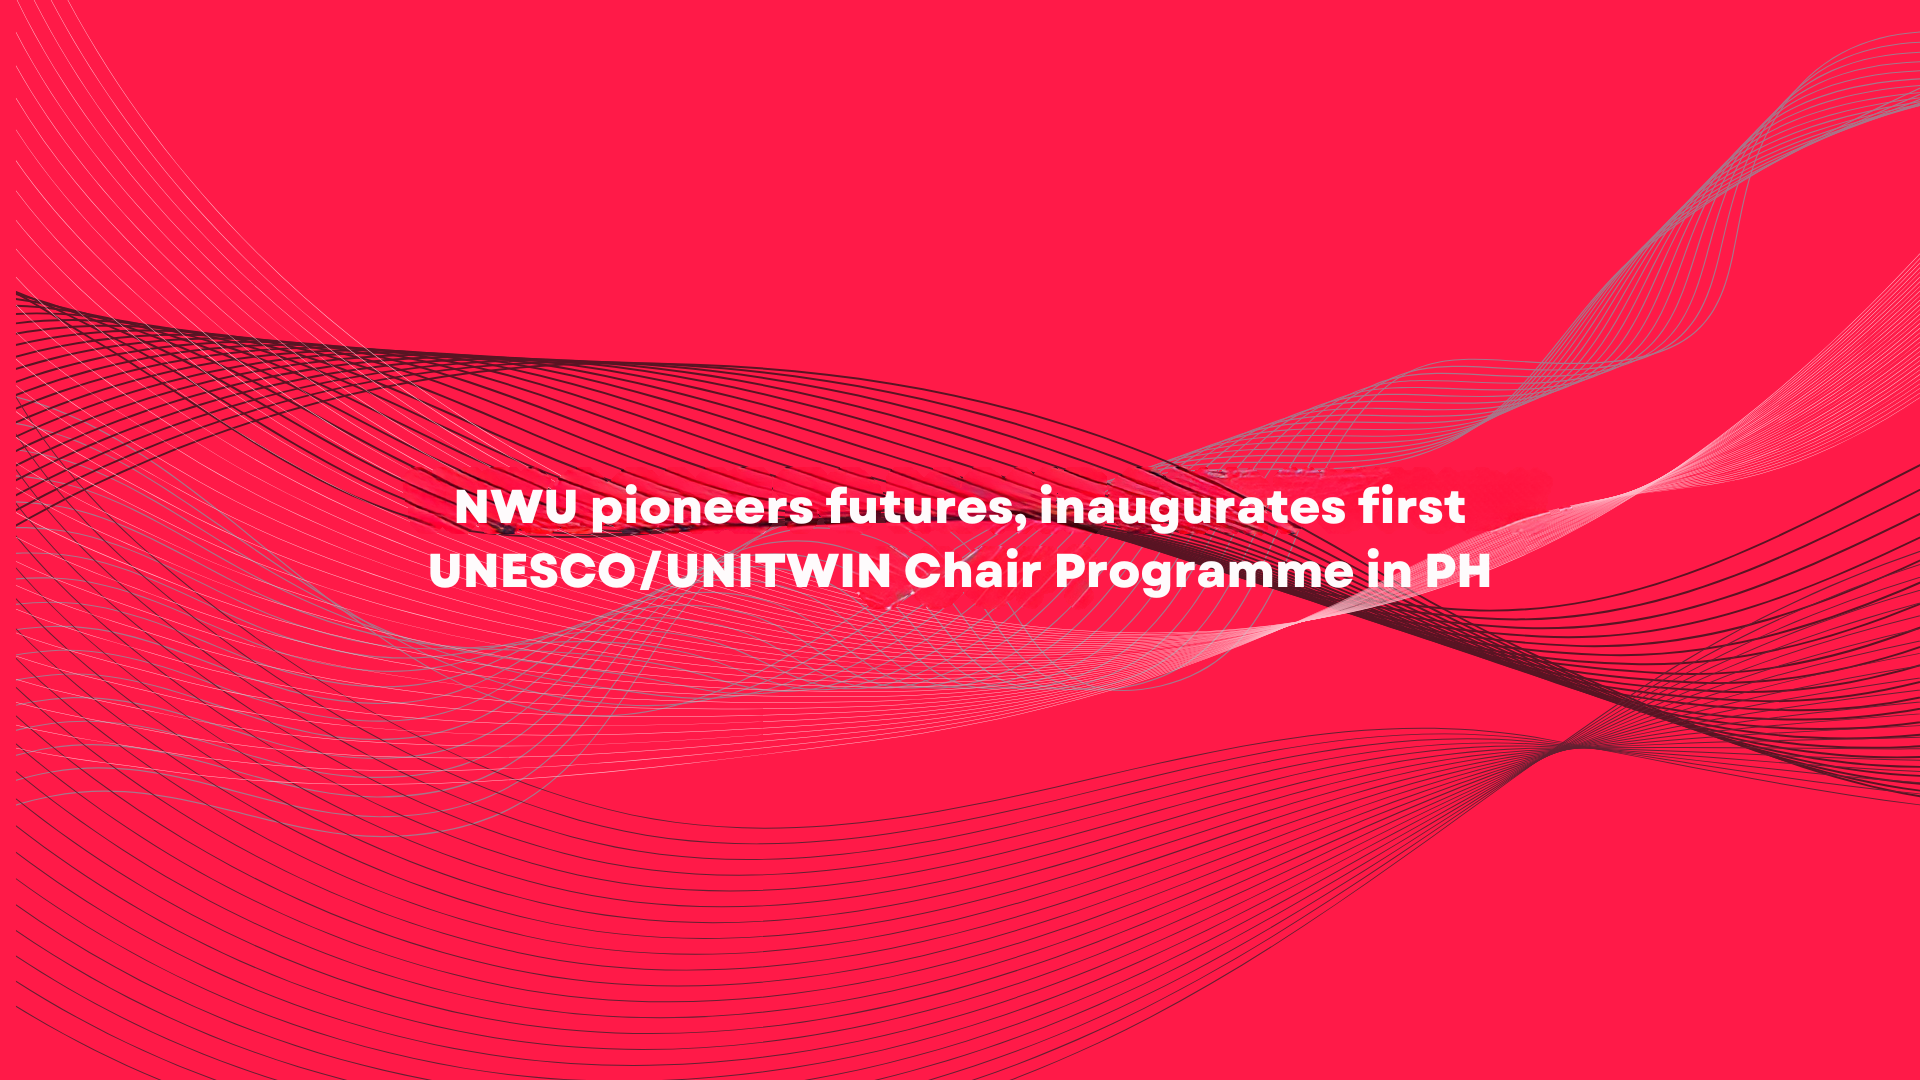 NWU pioneers futures, inaugurates first UNESCO/UNITWIN Chair Programme in PH